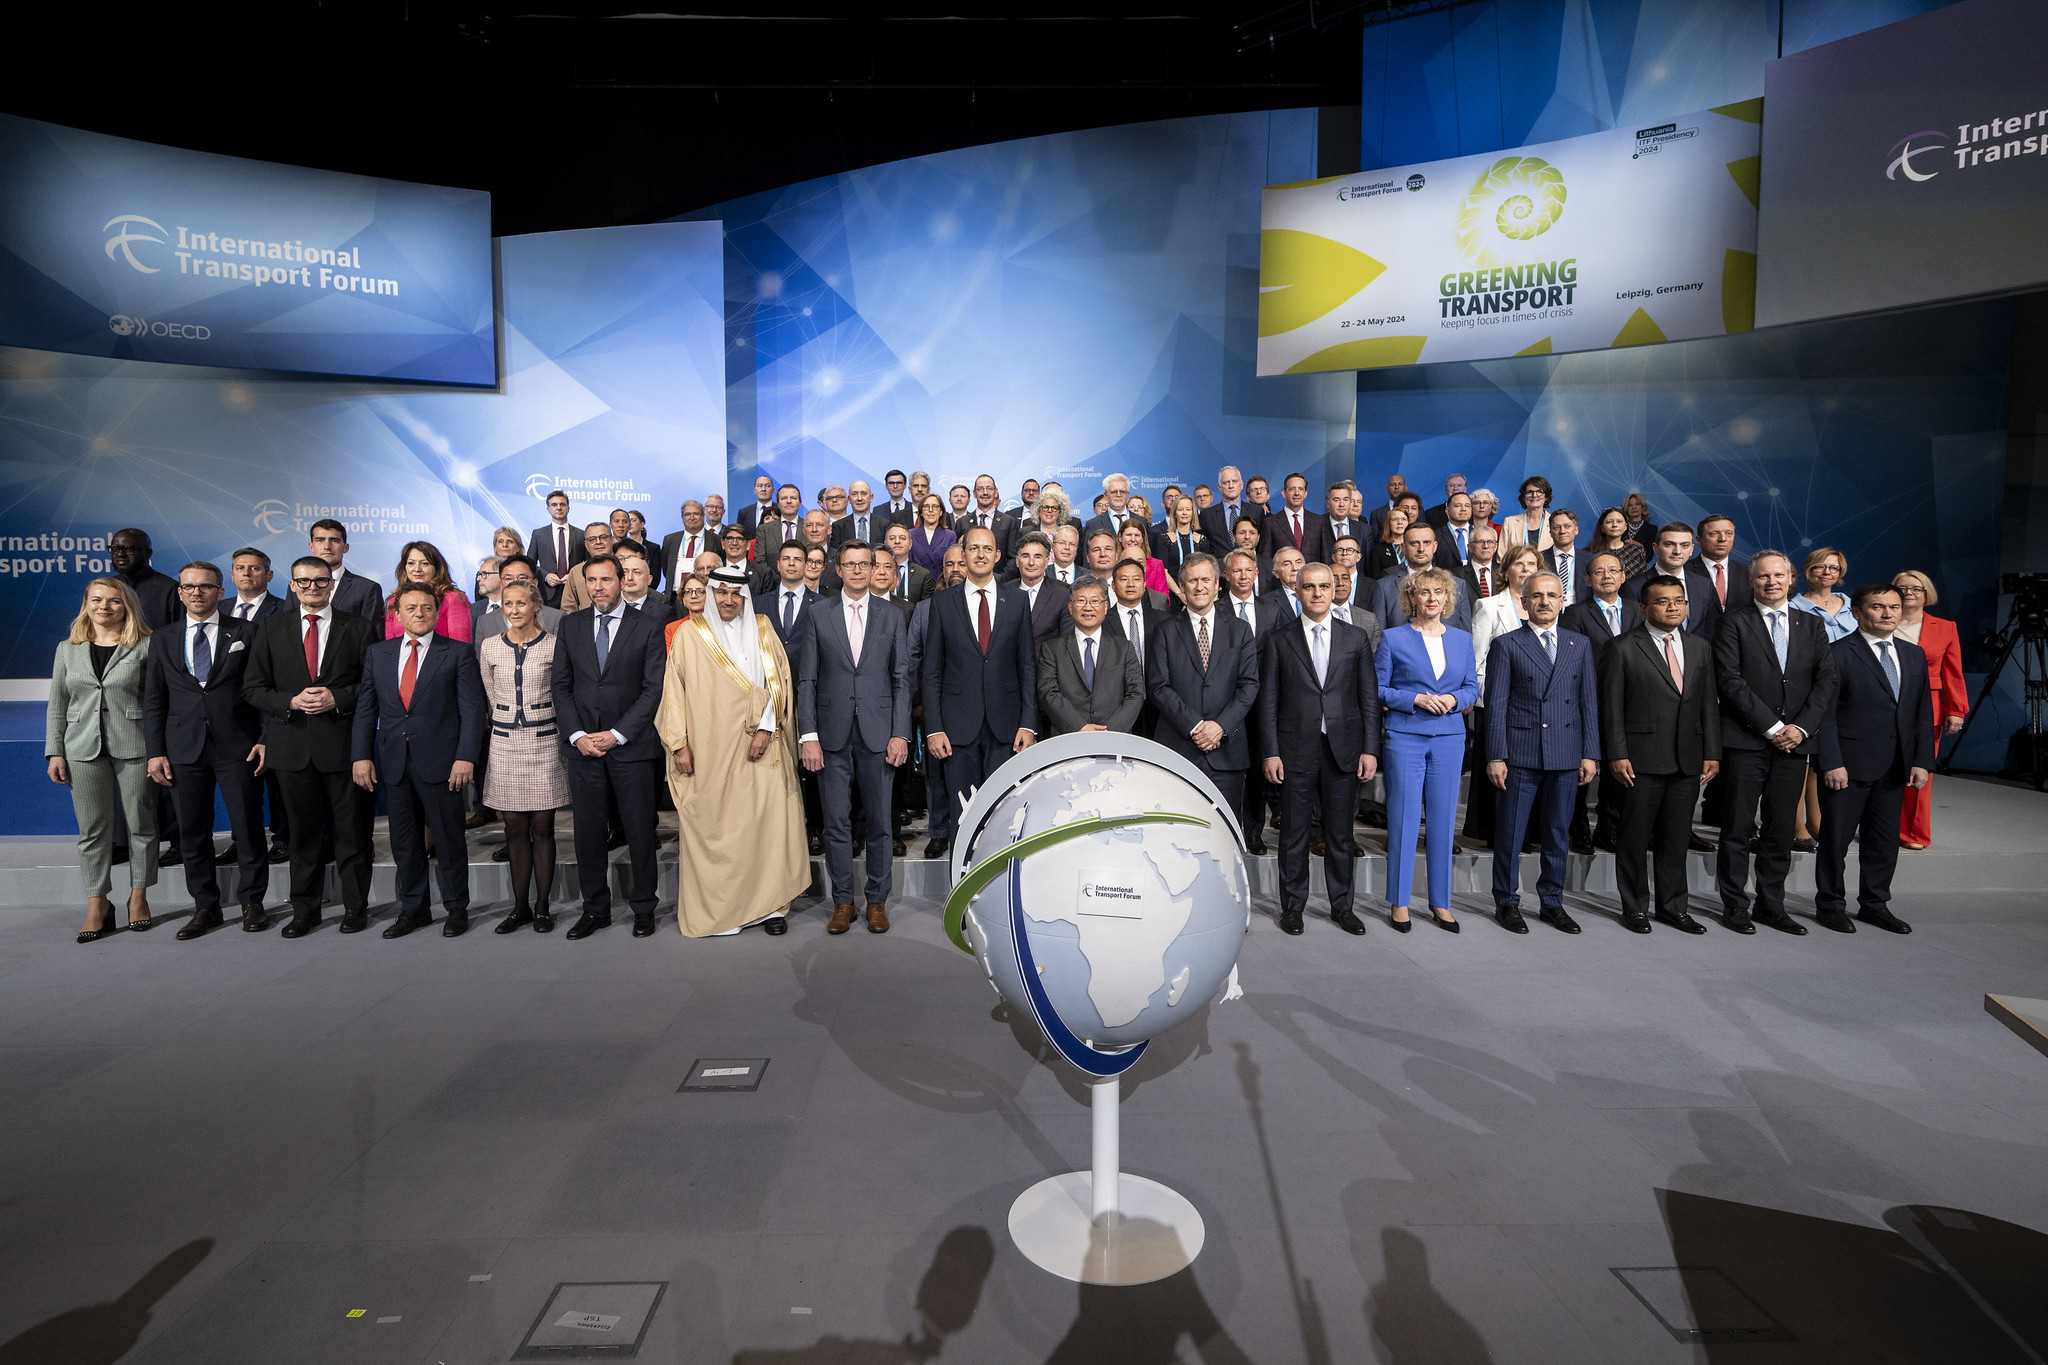 CAF promotes sustainable mobility the International Transport Forum